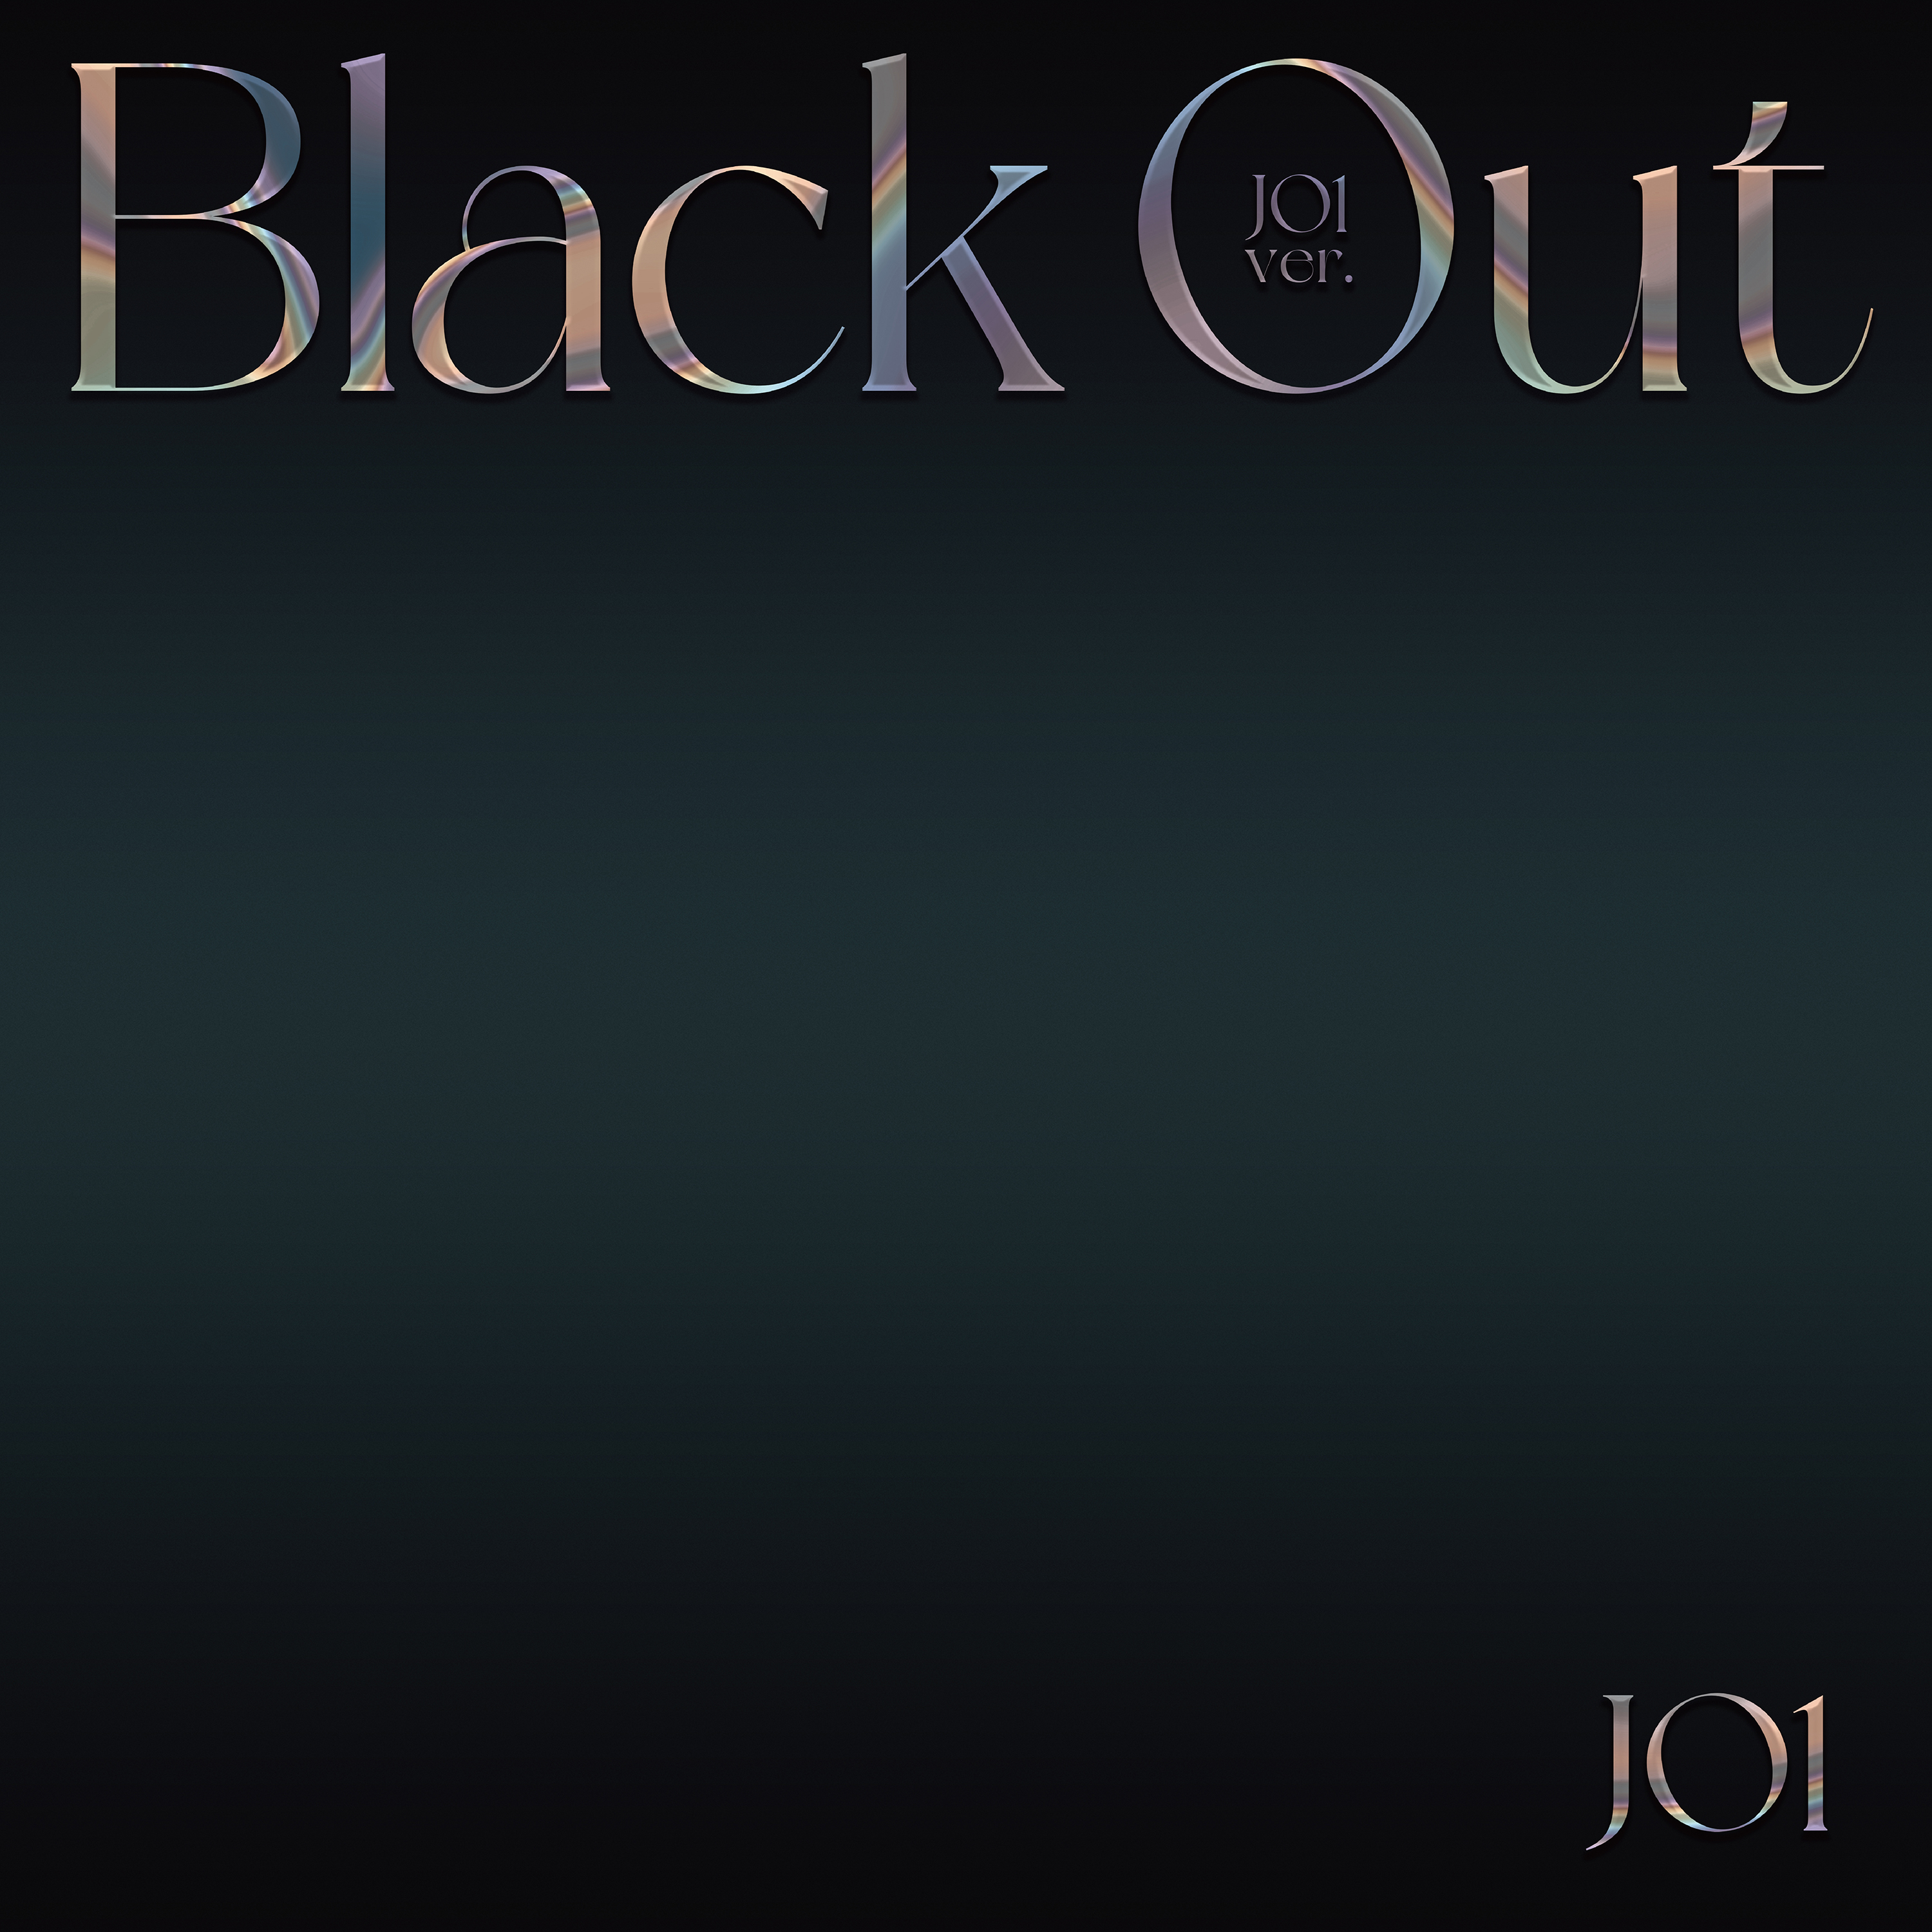 Black Out(JO1 ver.)